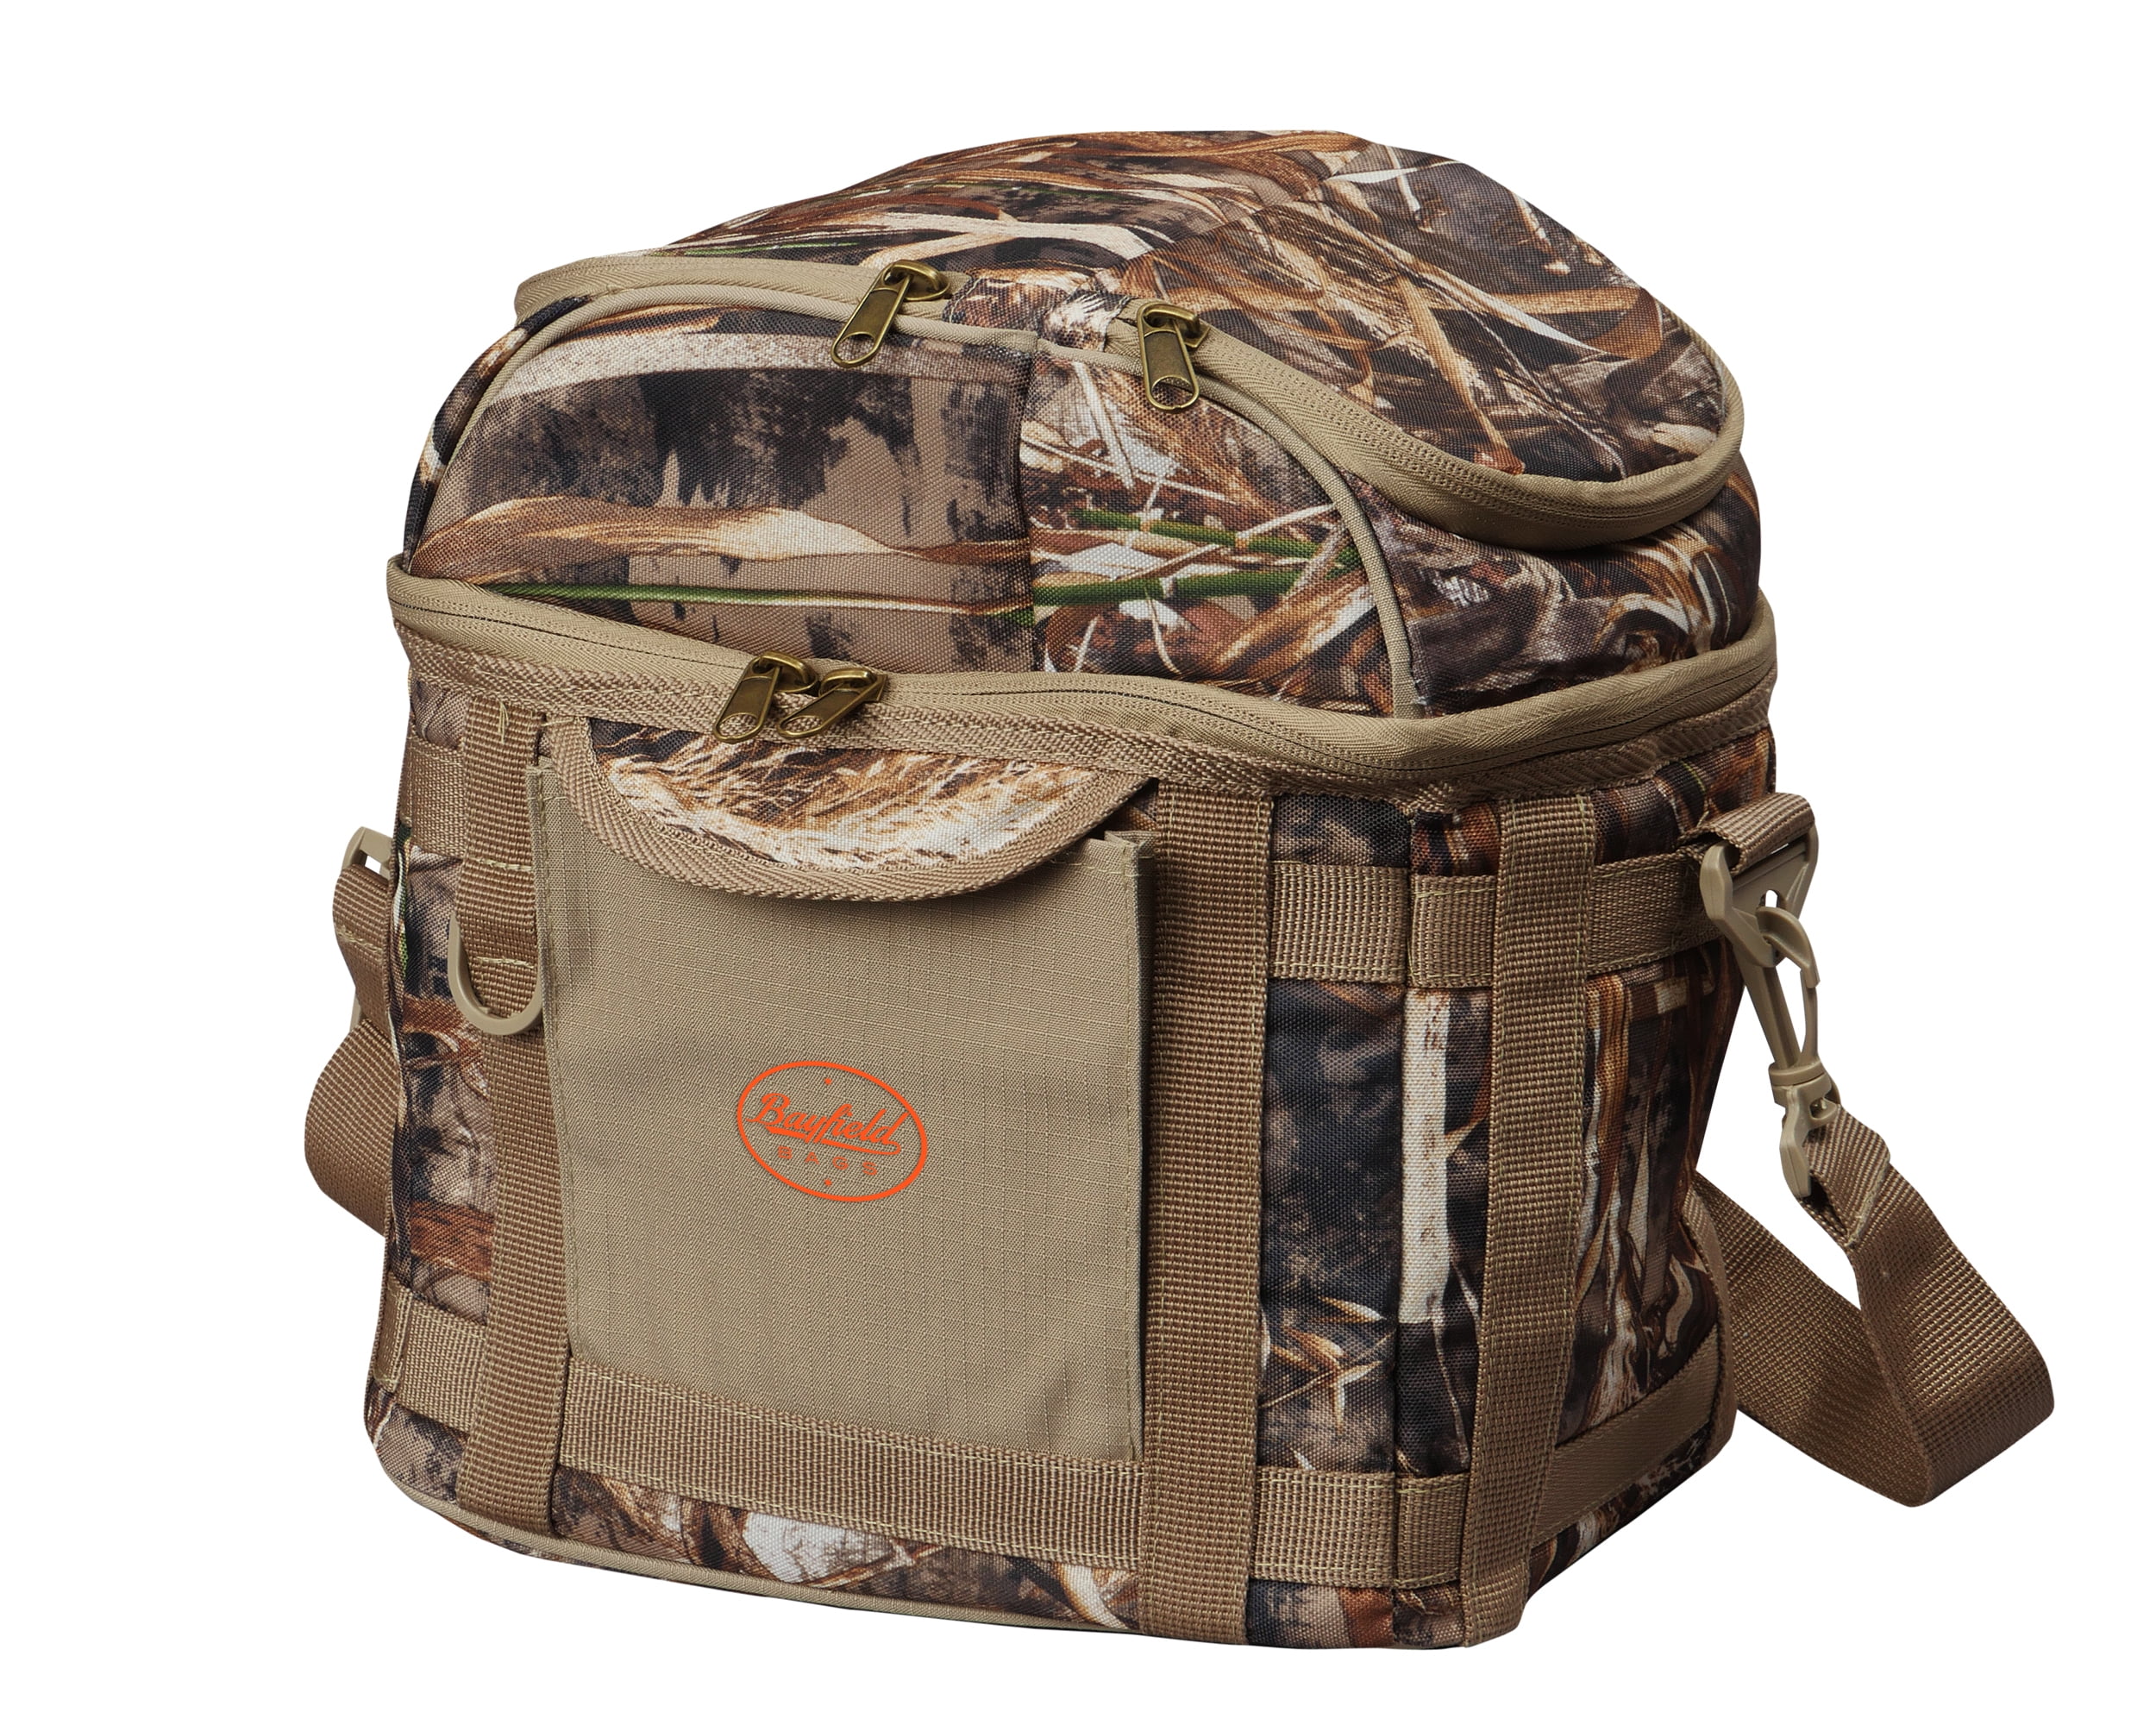 Bayfield Bags - Realtree Camo Lunch Bag 